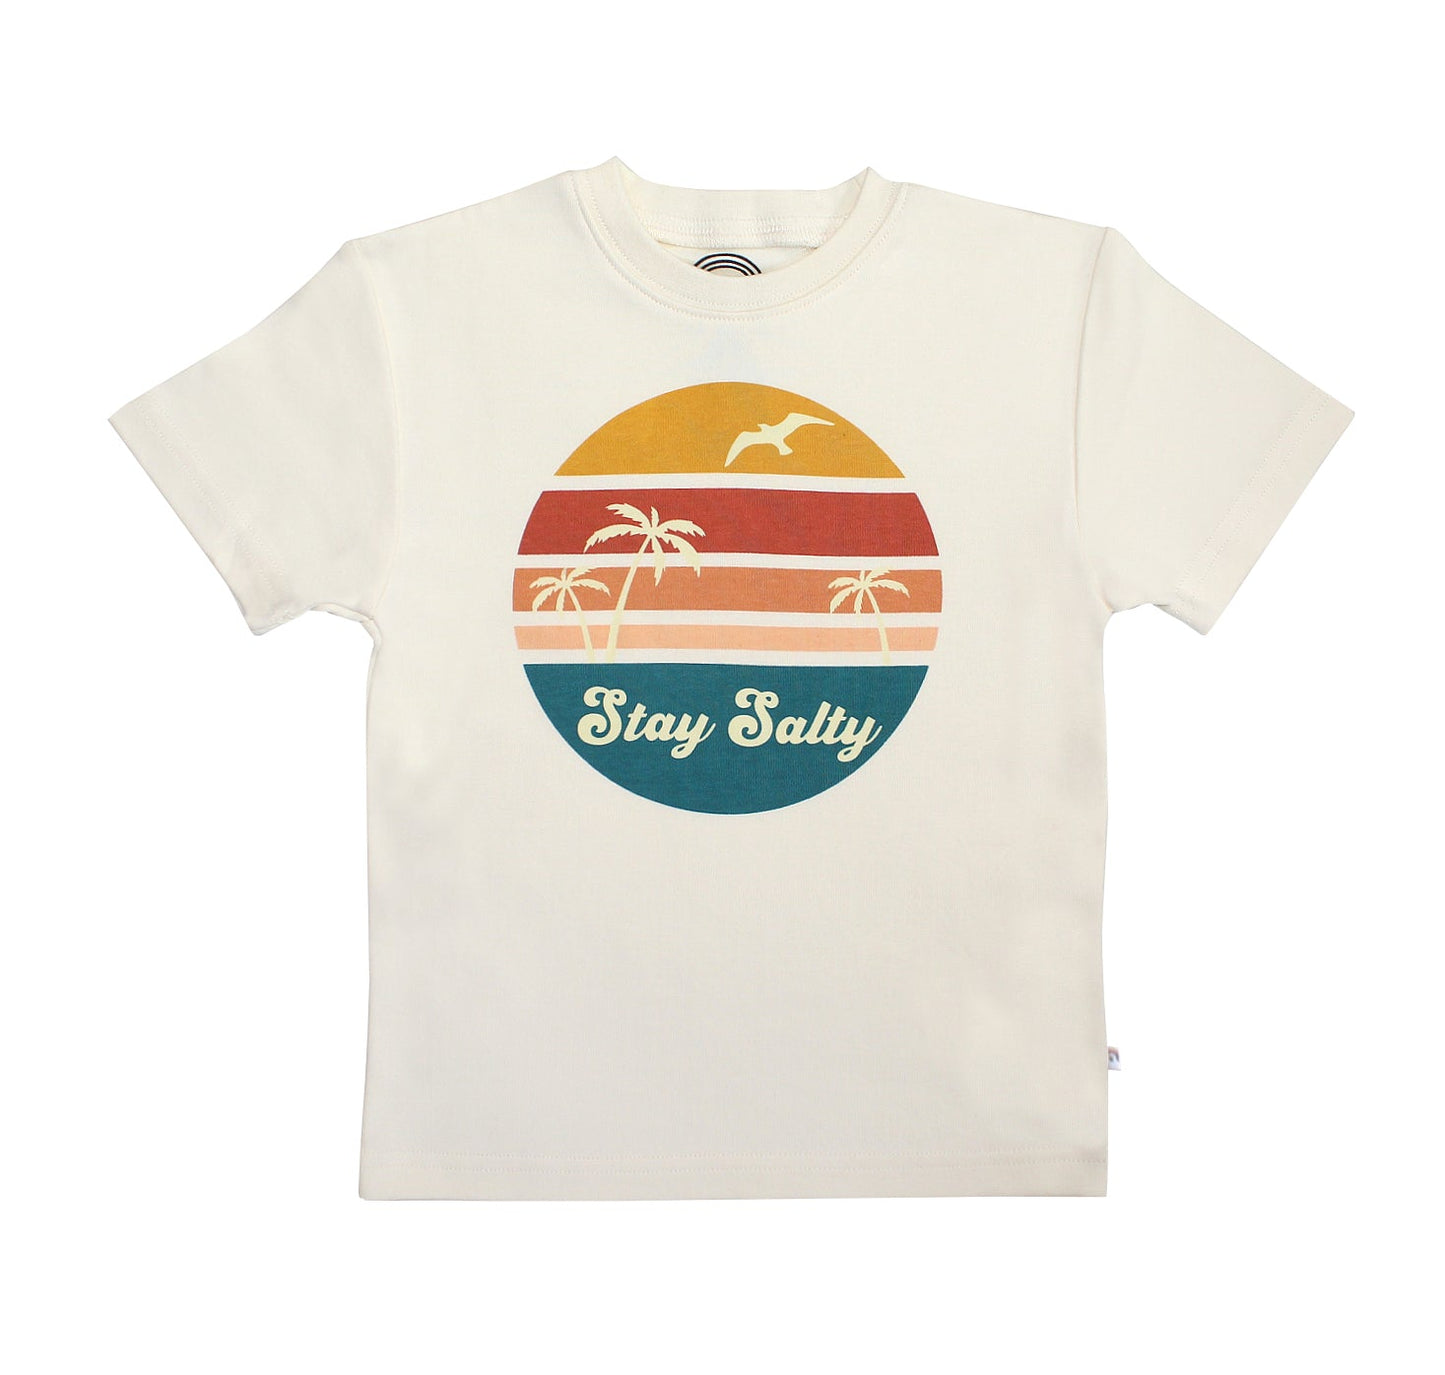 Stay Salty Cotton Toddler Short Sleeve Shirt